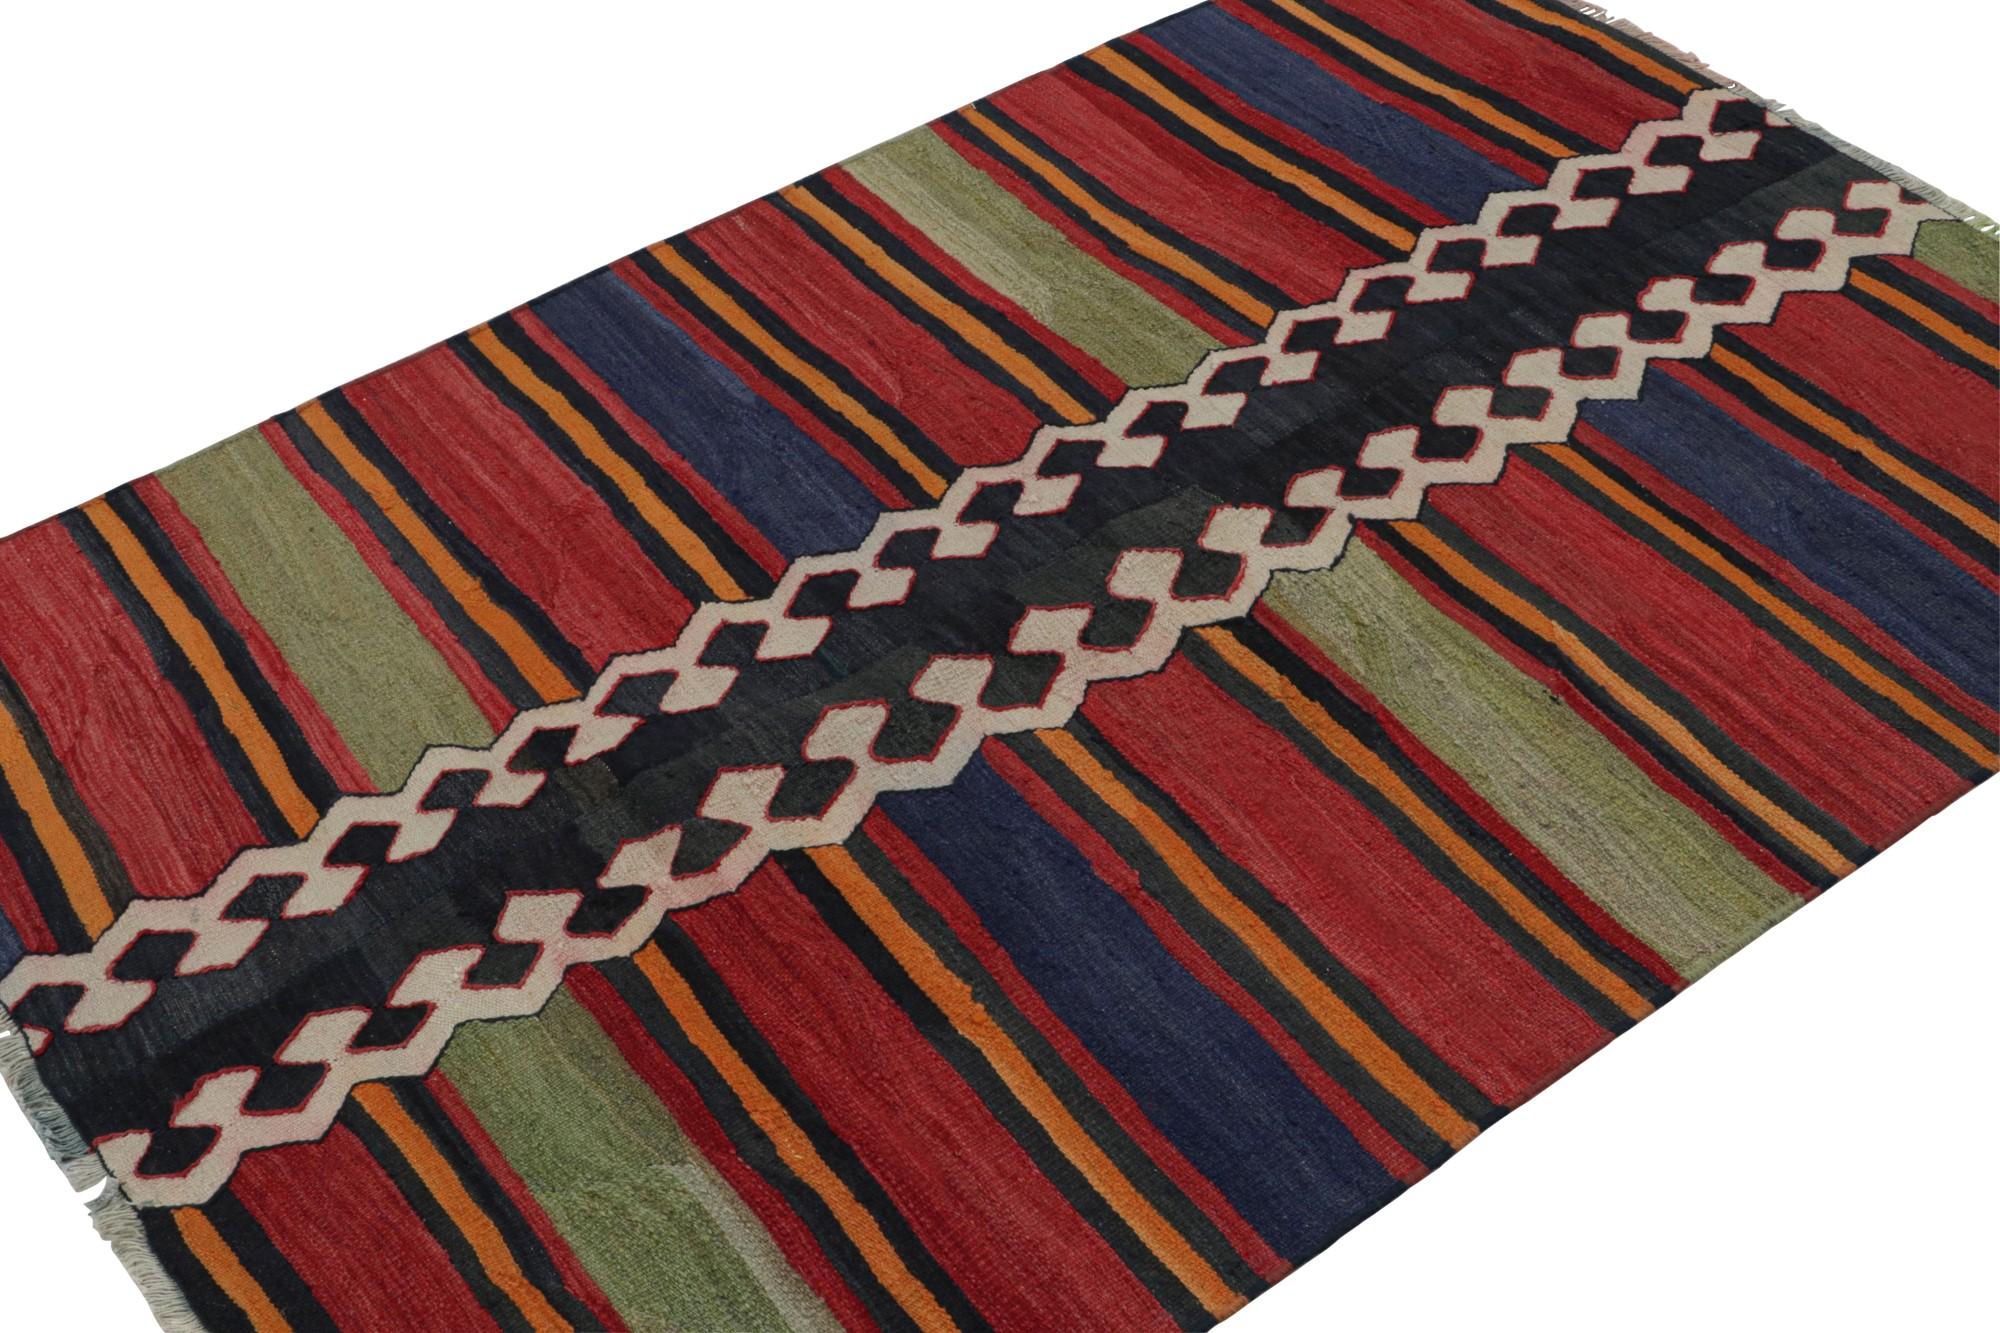 This vintage 4x6 tribal Kilim is a new addition to Rug & Kilim’s mid-century curations. Handwoven in wool, it originates from Afghanistan circa 1950-1960.

On the Design: 

This flat weave hosts geometric patterns in polychromatic colorways.  Keen